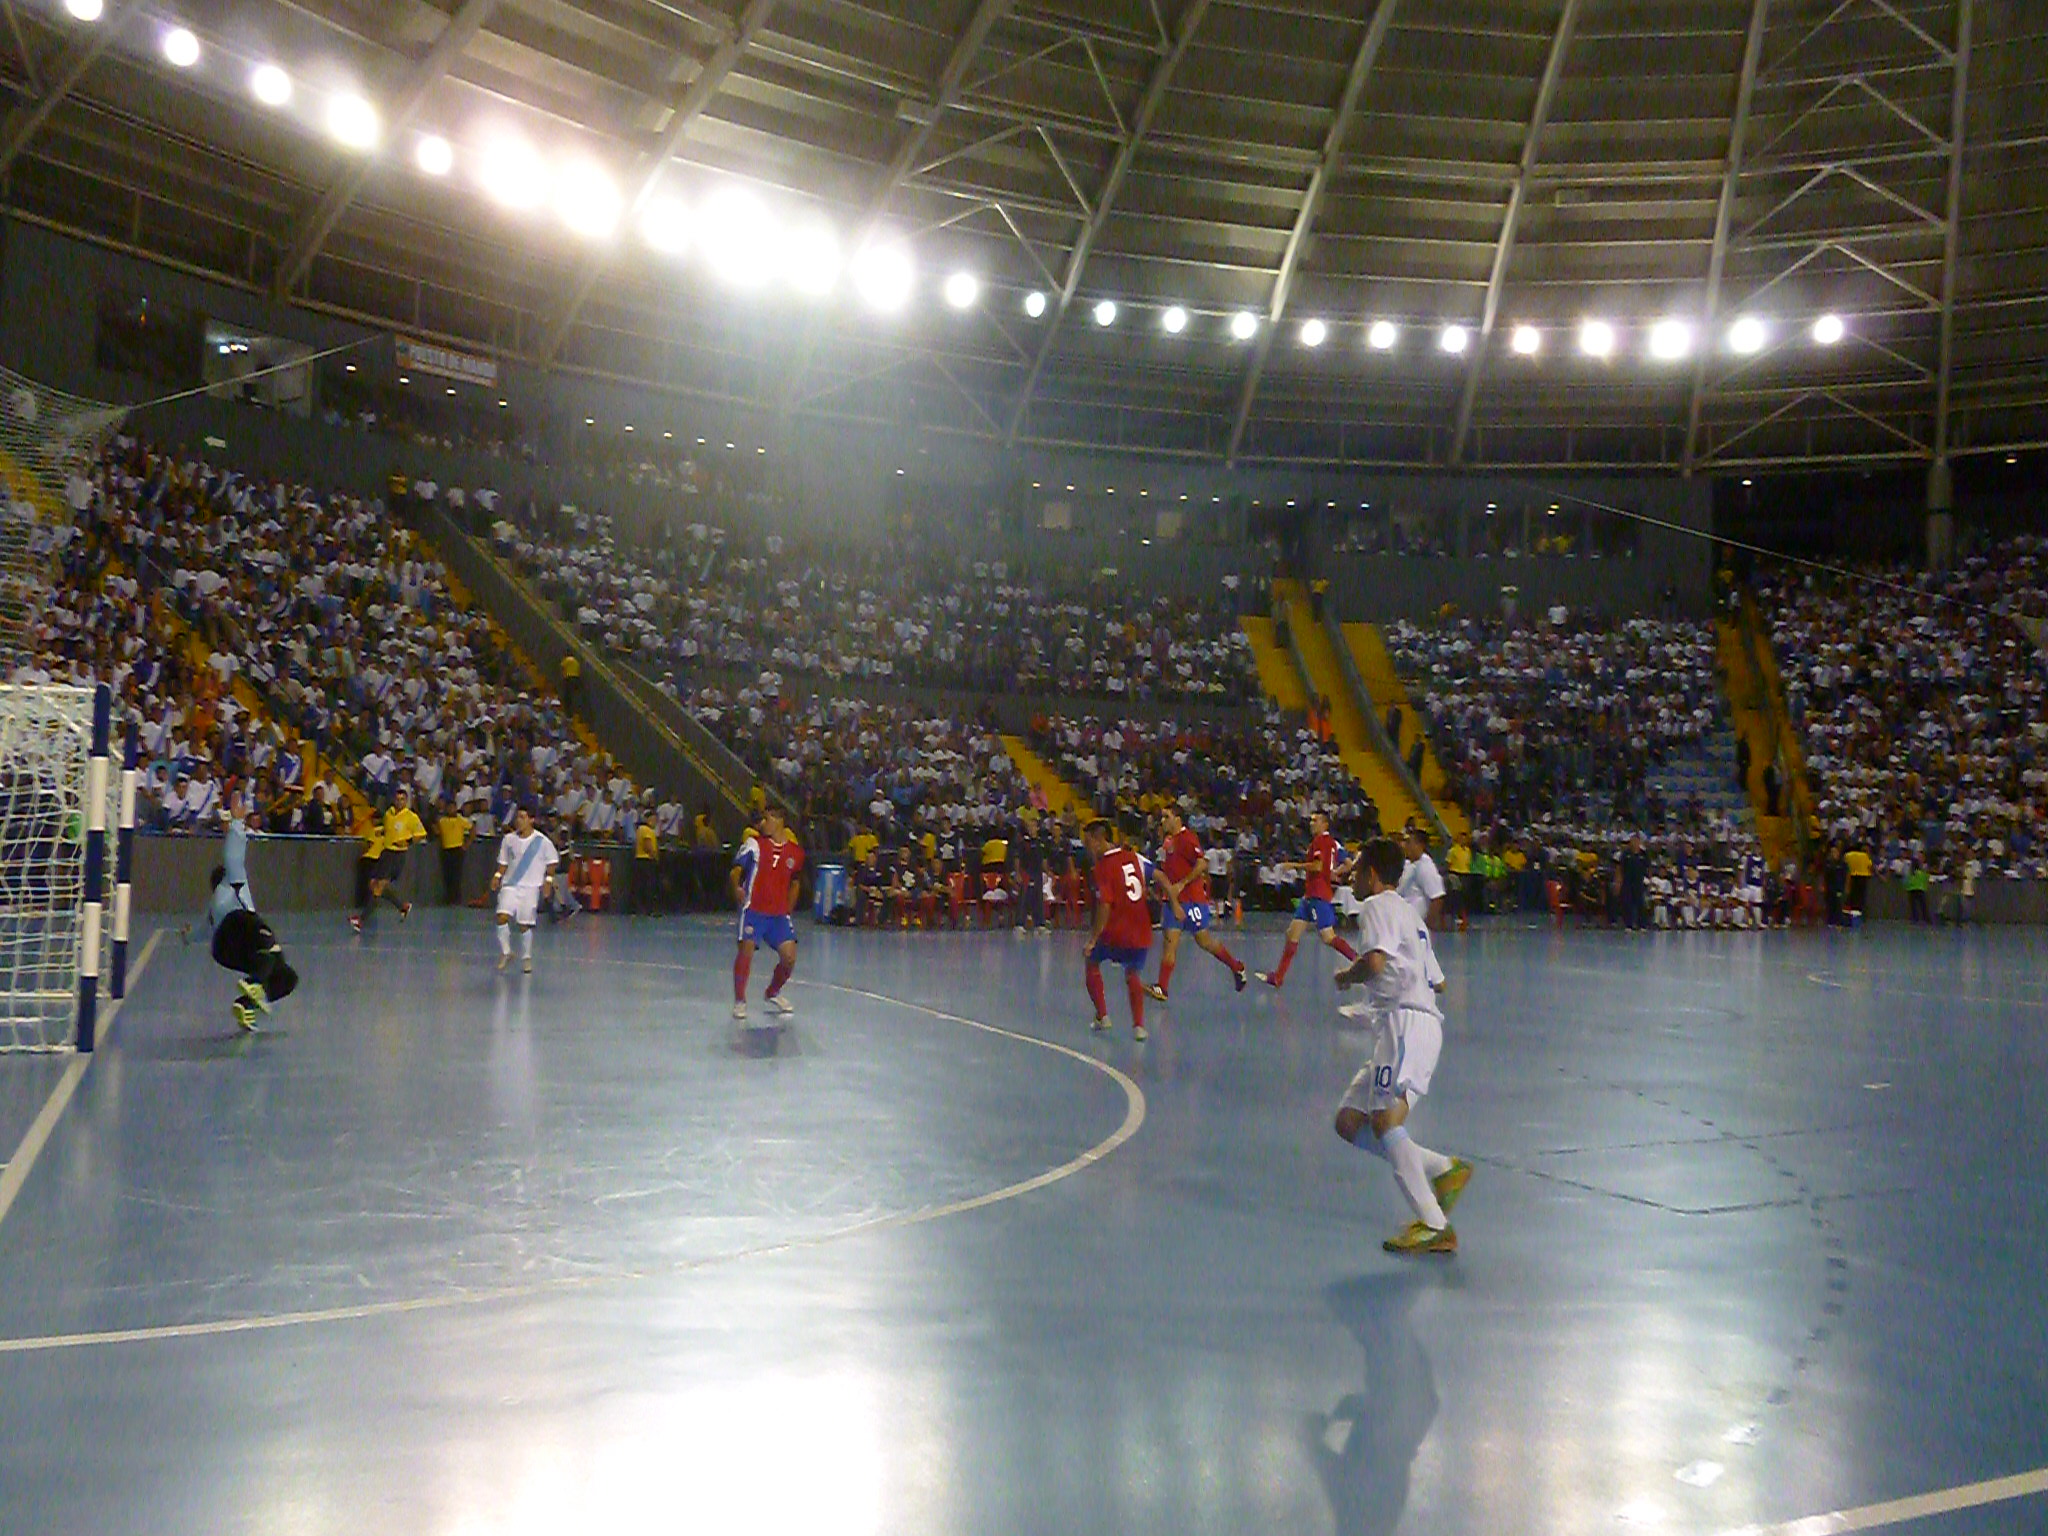 several men are playing soccer on an indoor arena